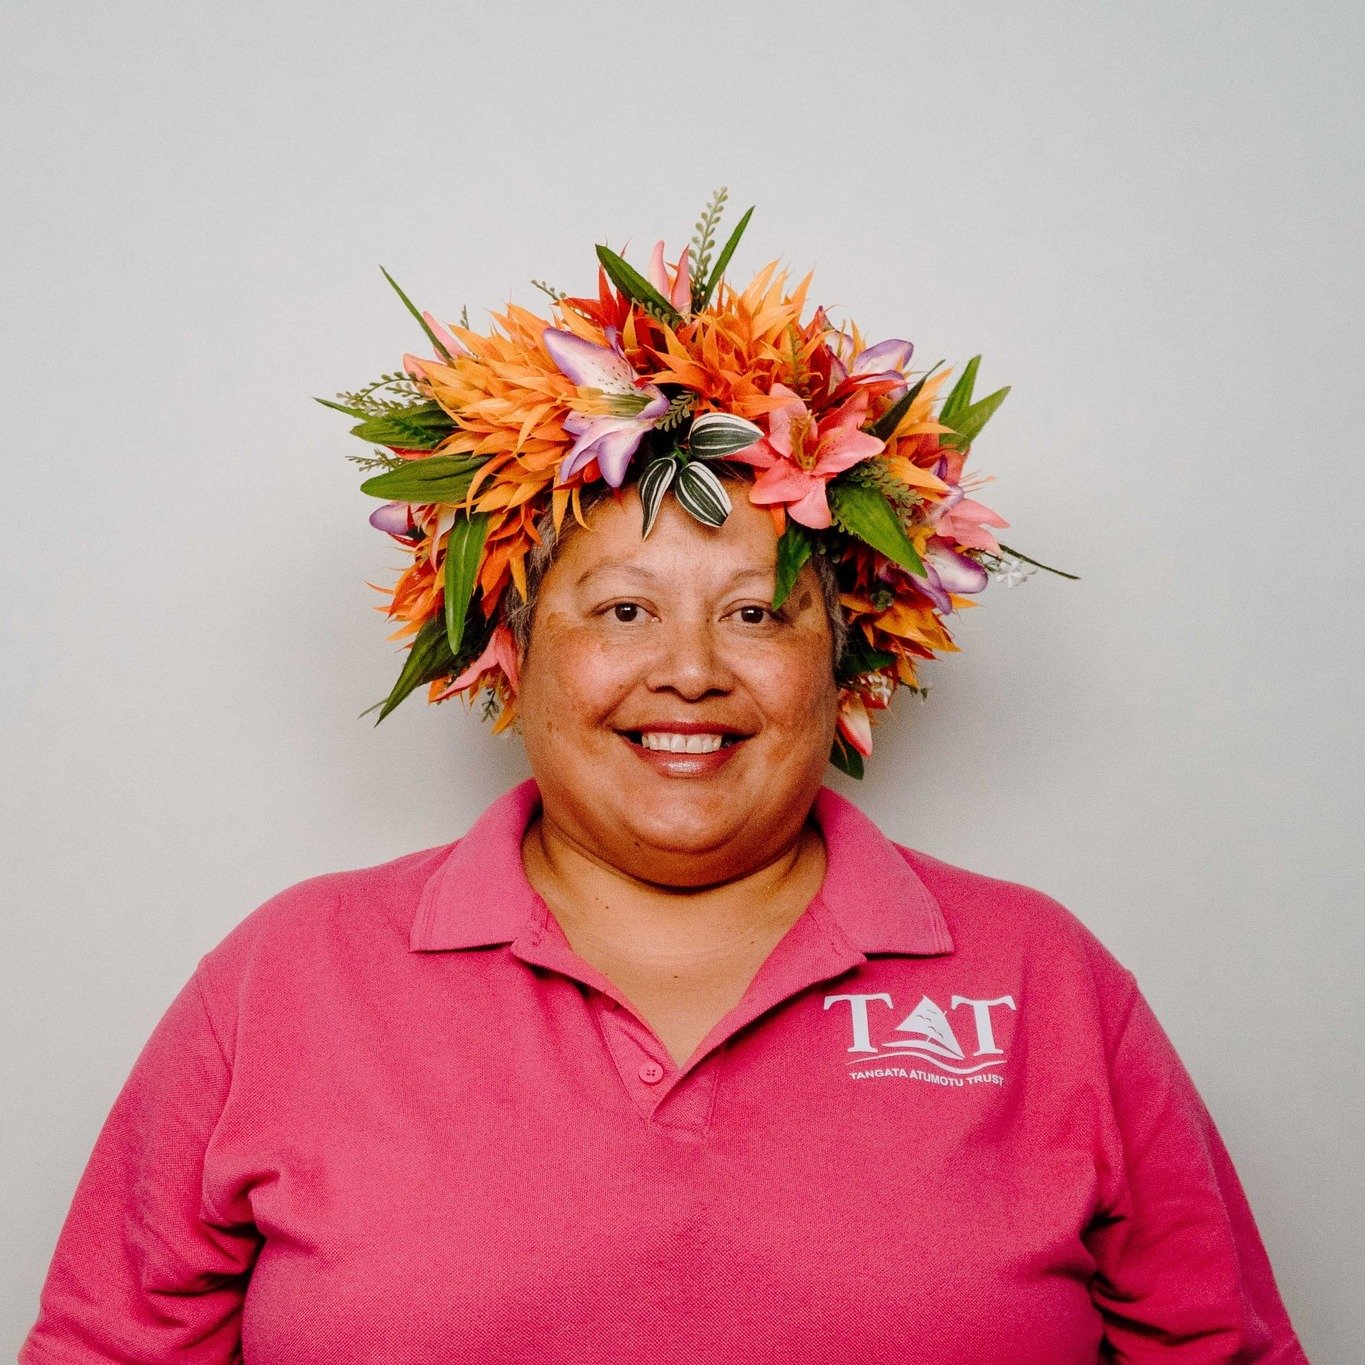 Meet Lisa &amp; Maureen! 🌺🌺🌺

Two of our friendly nurses that help run our mobile nursing team. 

Whilst yesterday was #InternationalNursesDay, we at Tangata Atumotu recognize the role nurses play every day in the improvement of our Pasifika wellb